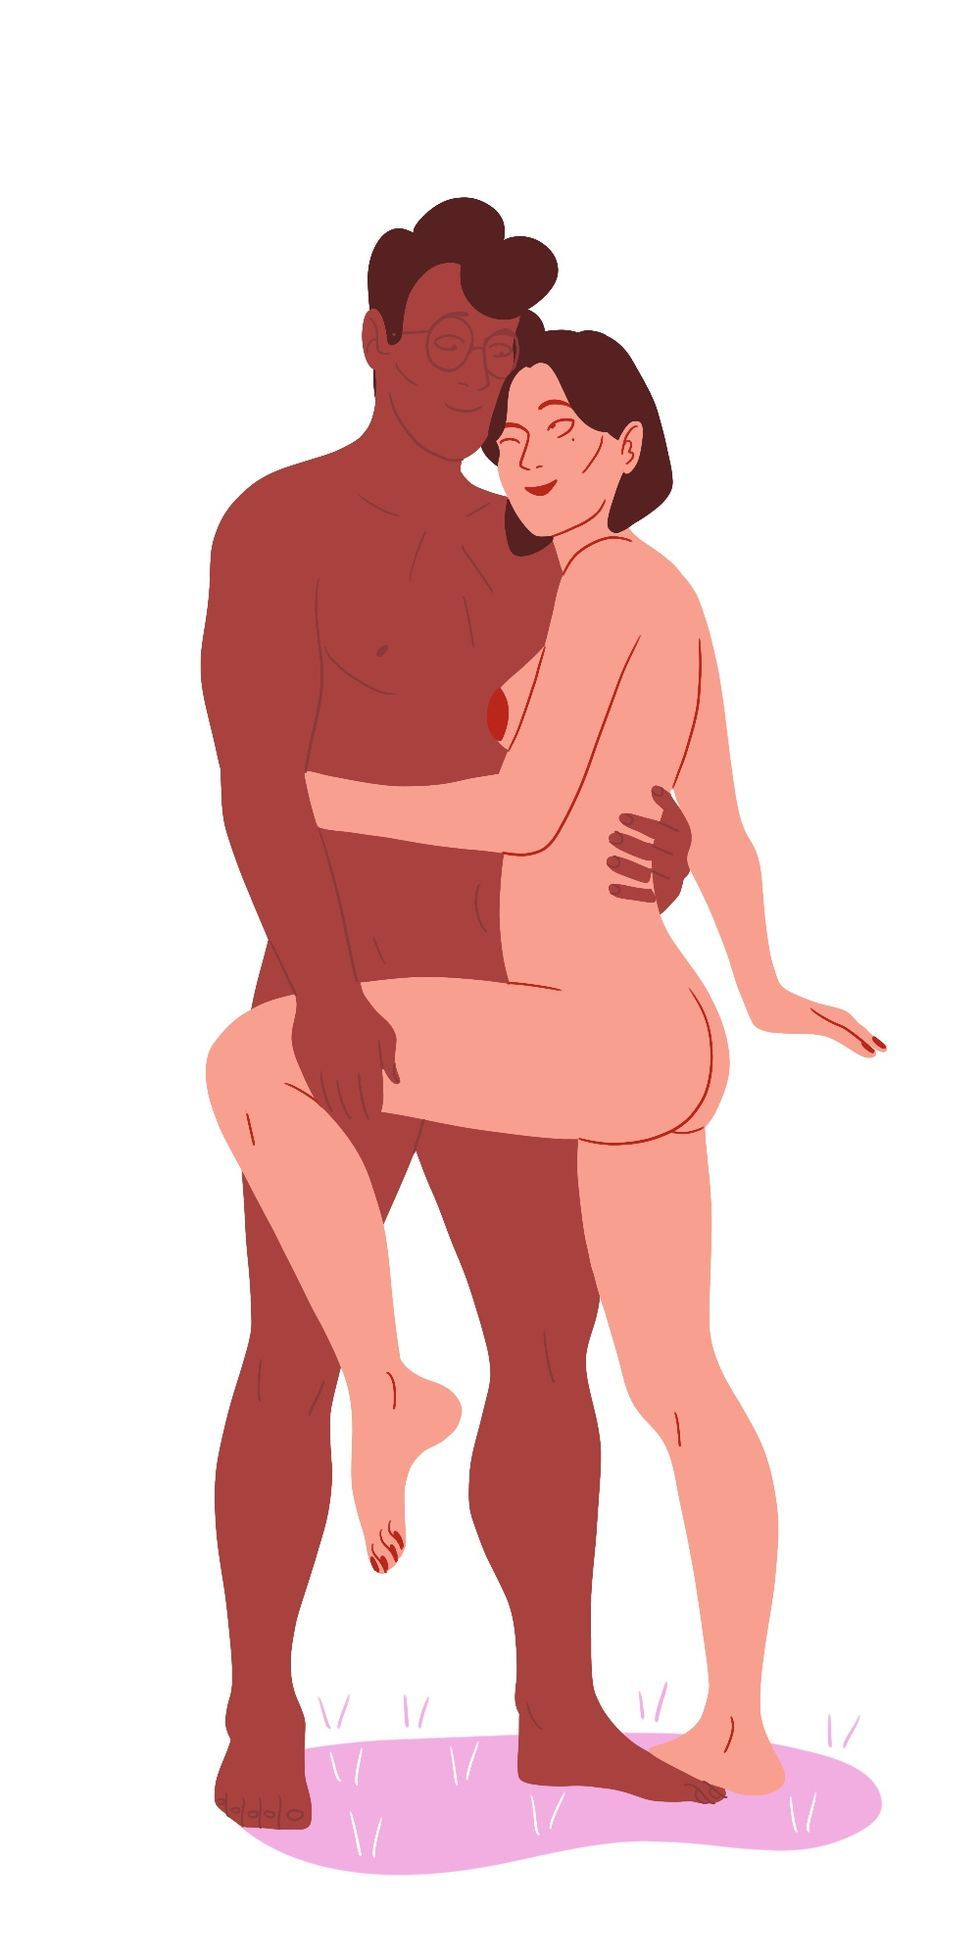 The Only Sex Position Guide You Need to Bookmark Right